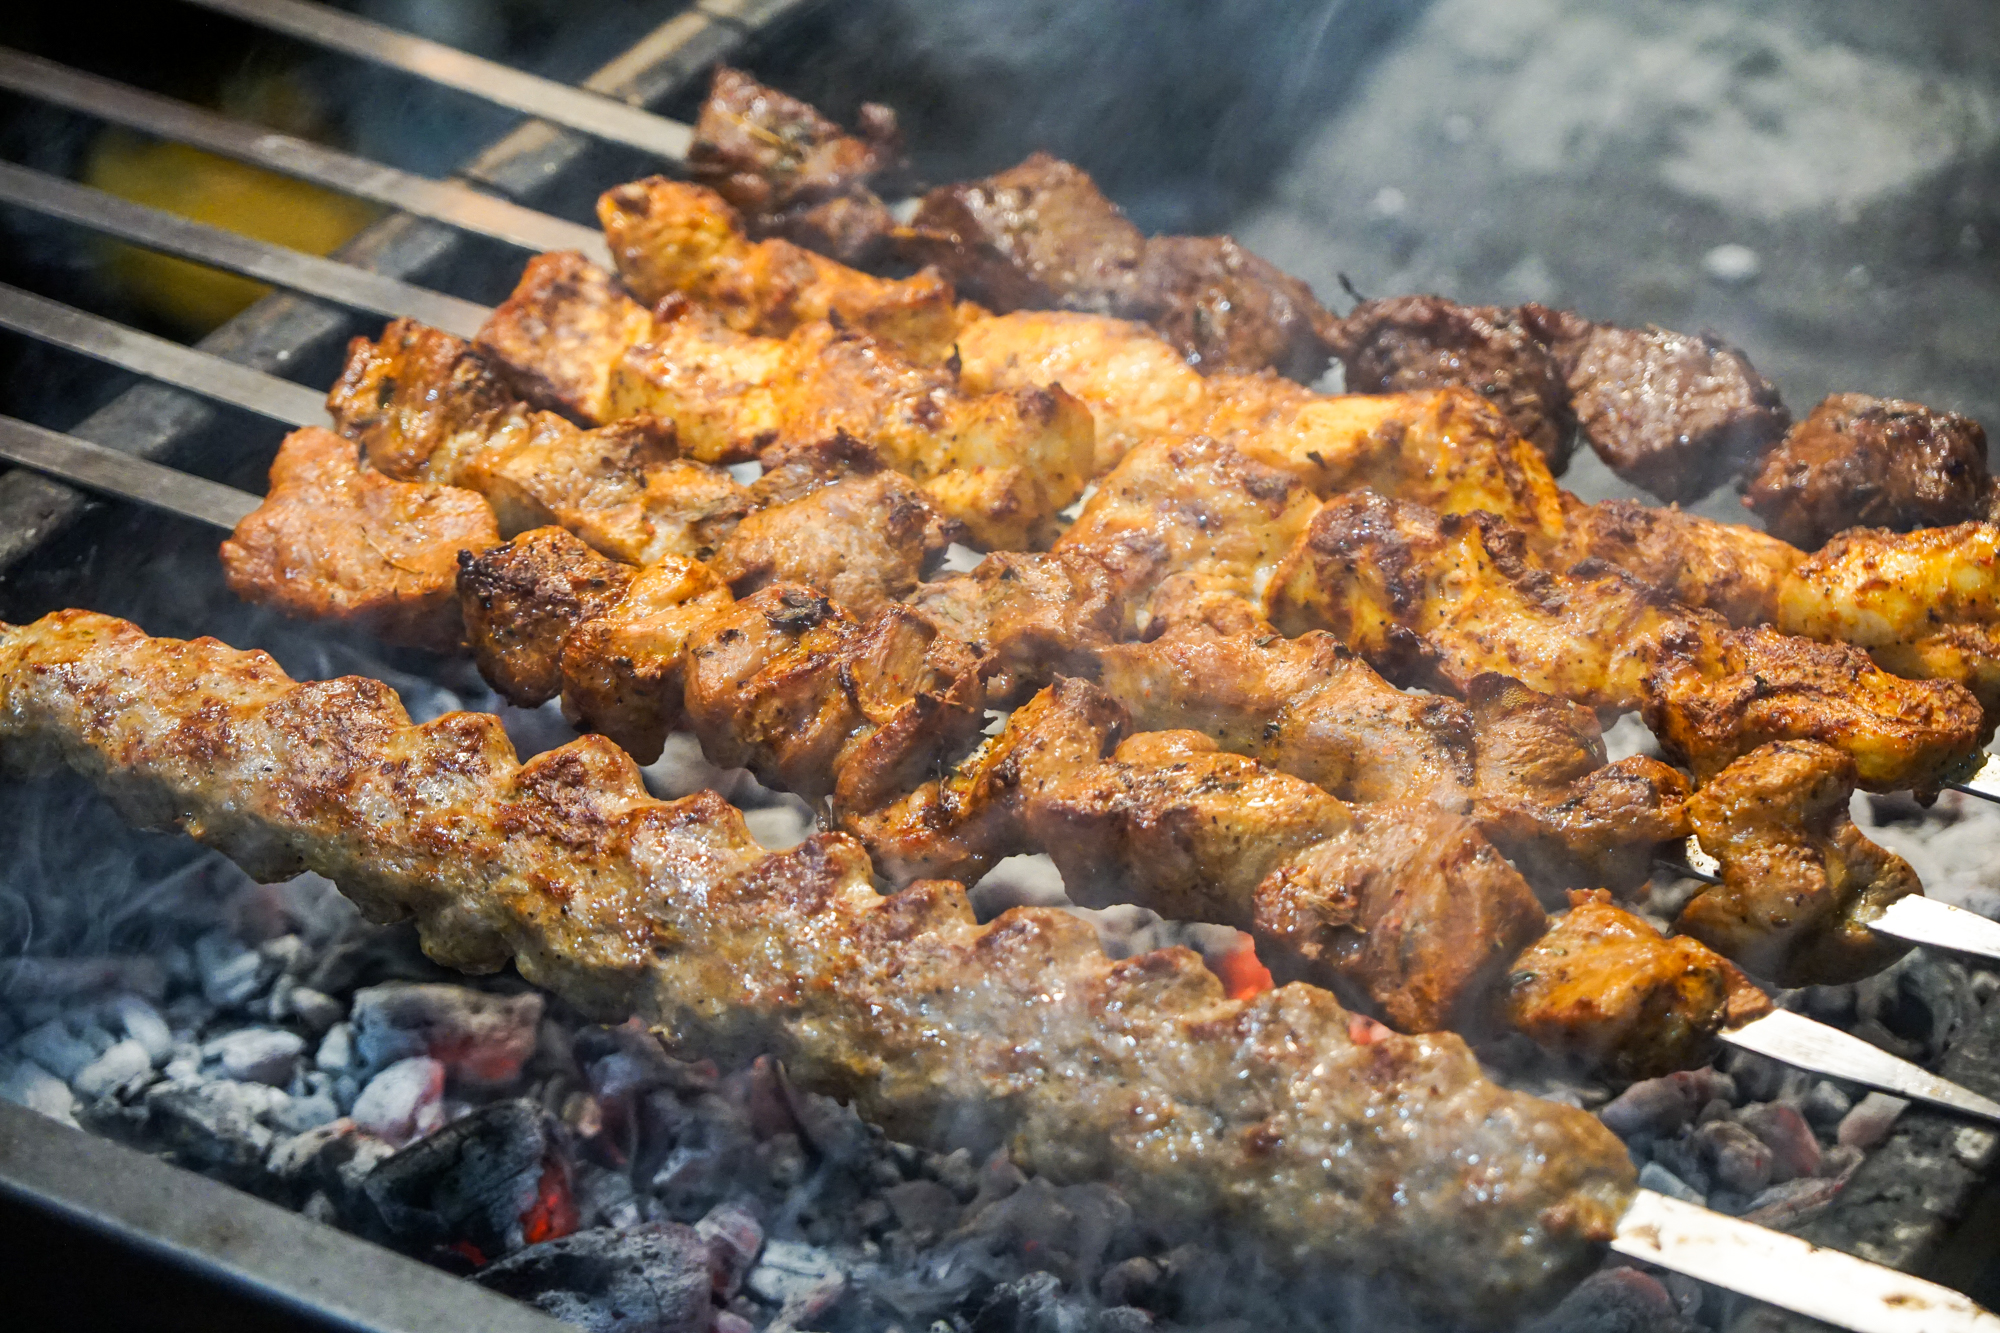 Grilled Armenian meat skewers over live fire.